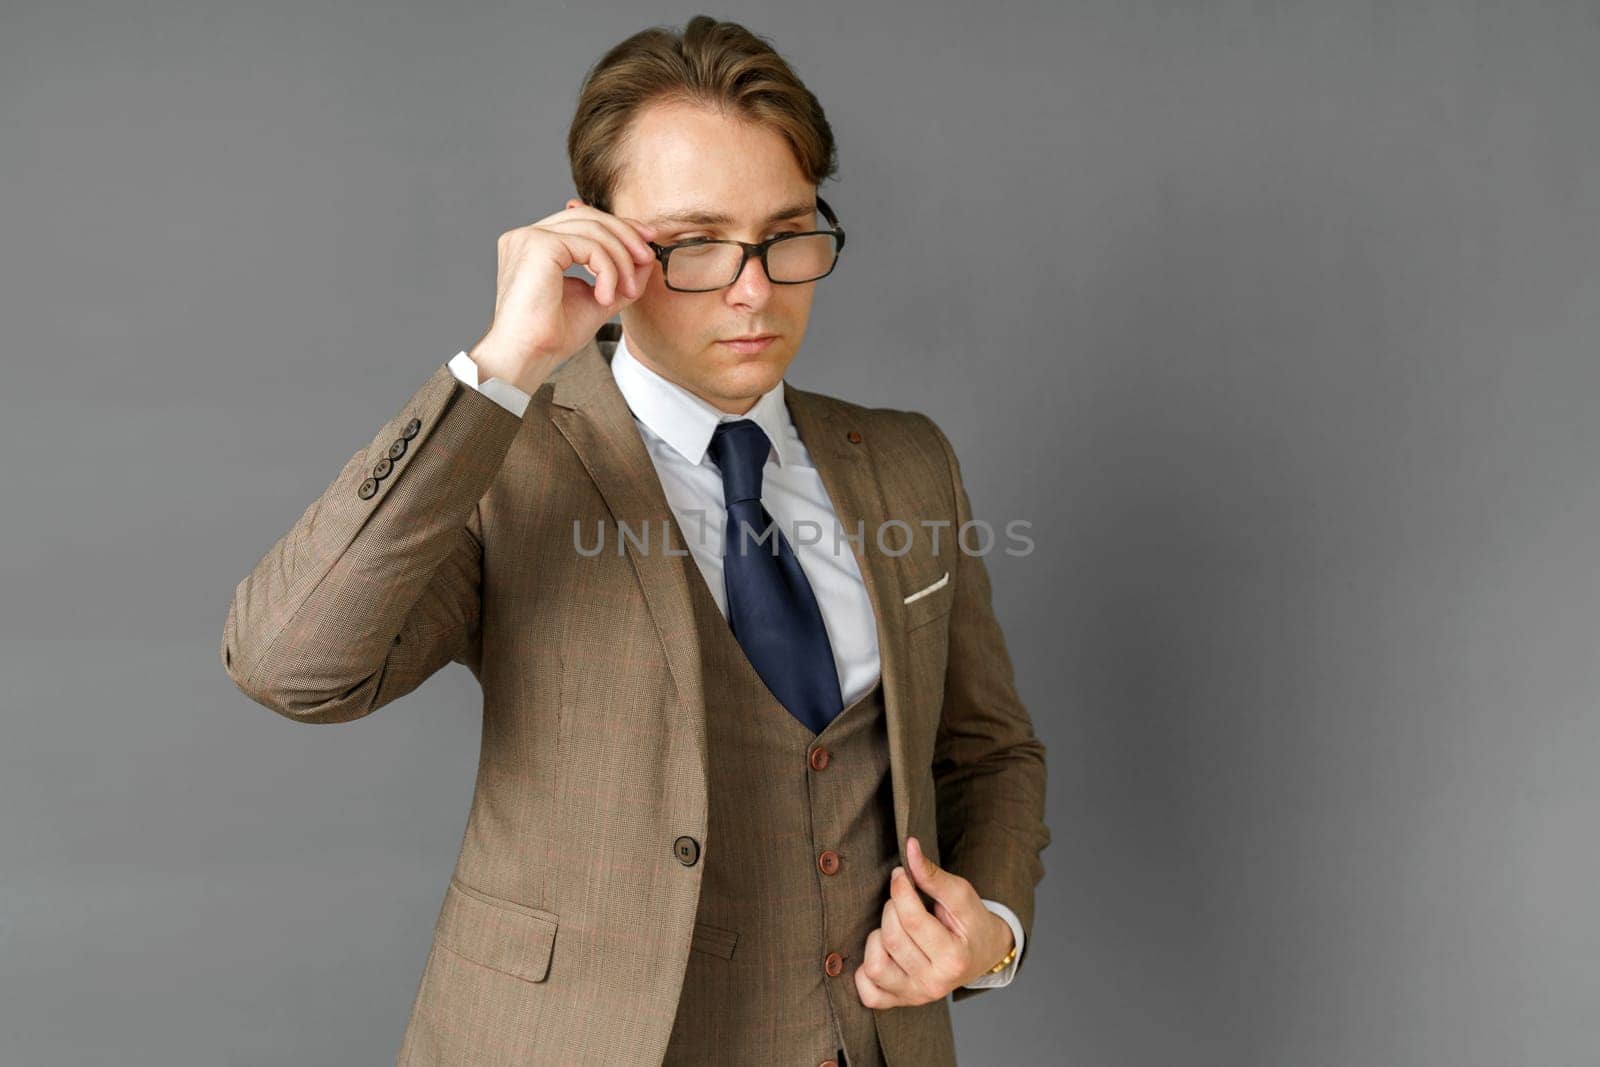 Portrait of a businessman in a suit, who adjusts his glasses. Gray background. by Sd28DimoN_1976